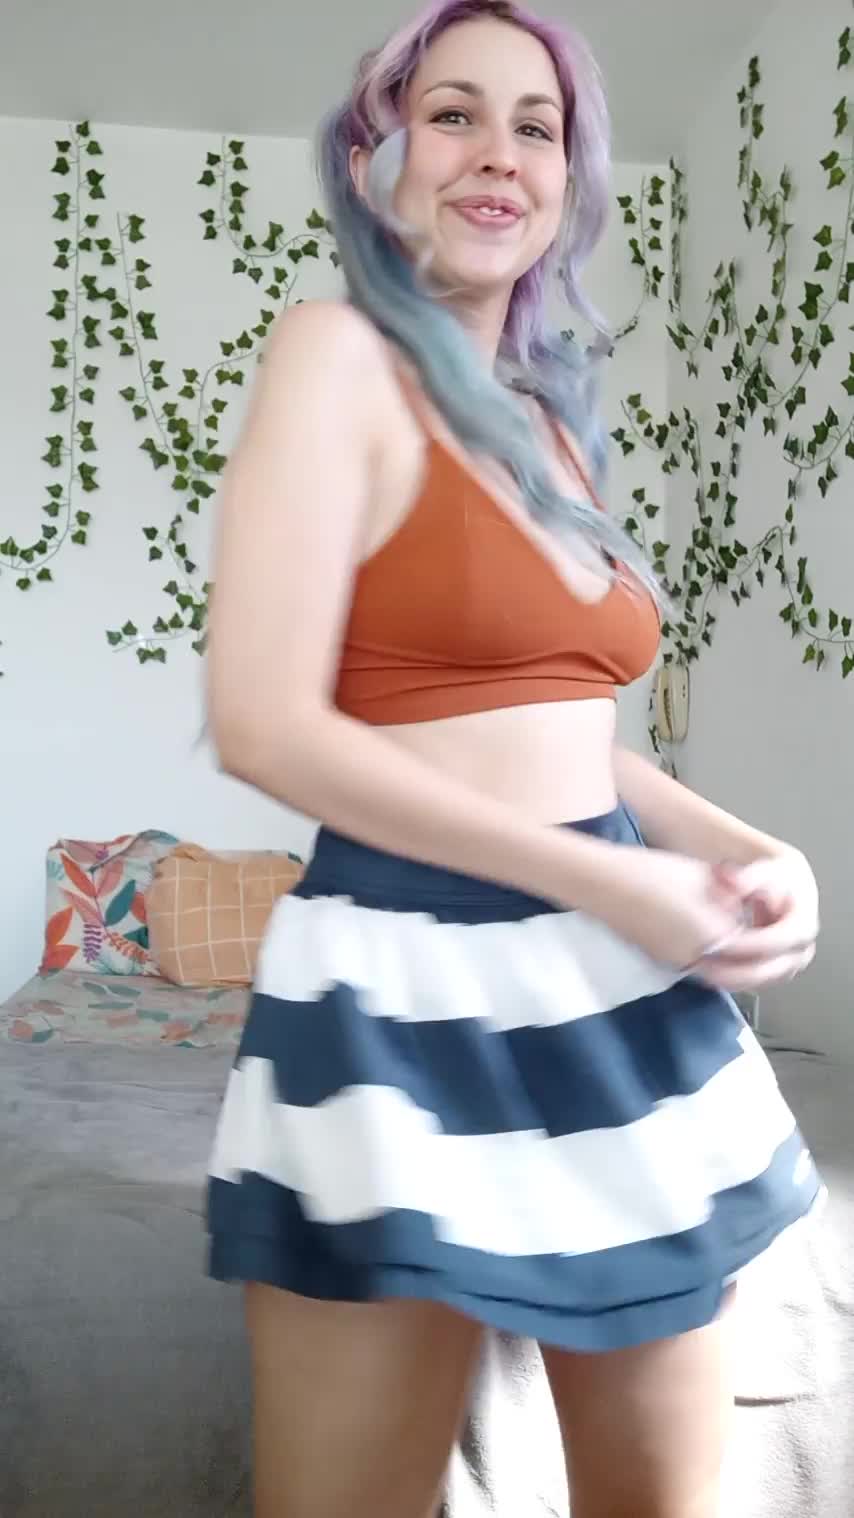 Wanna come play with my pale boobs and butt? 😋 : video clip